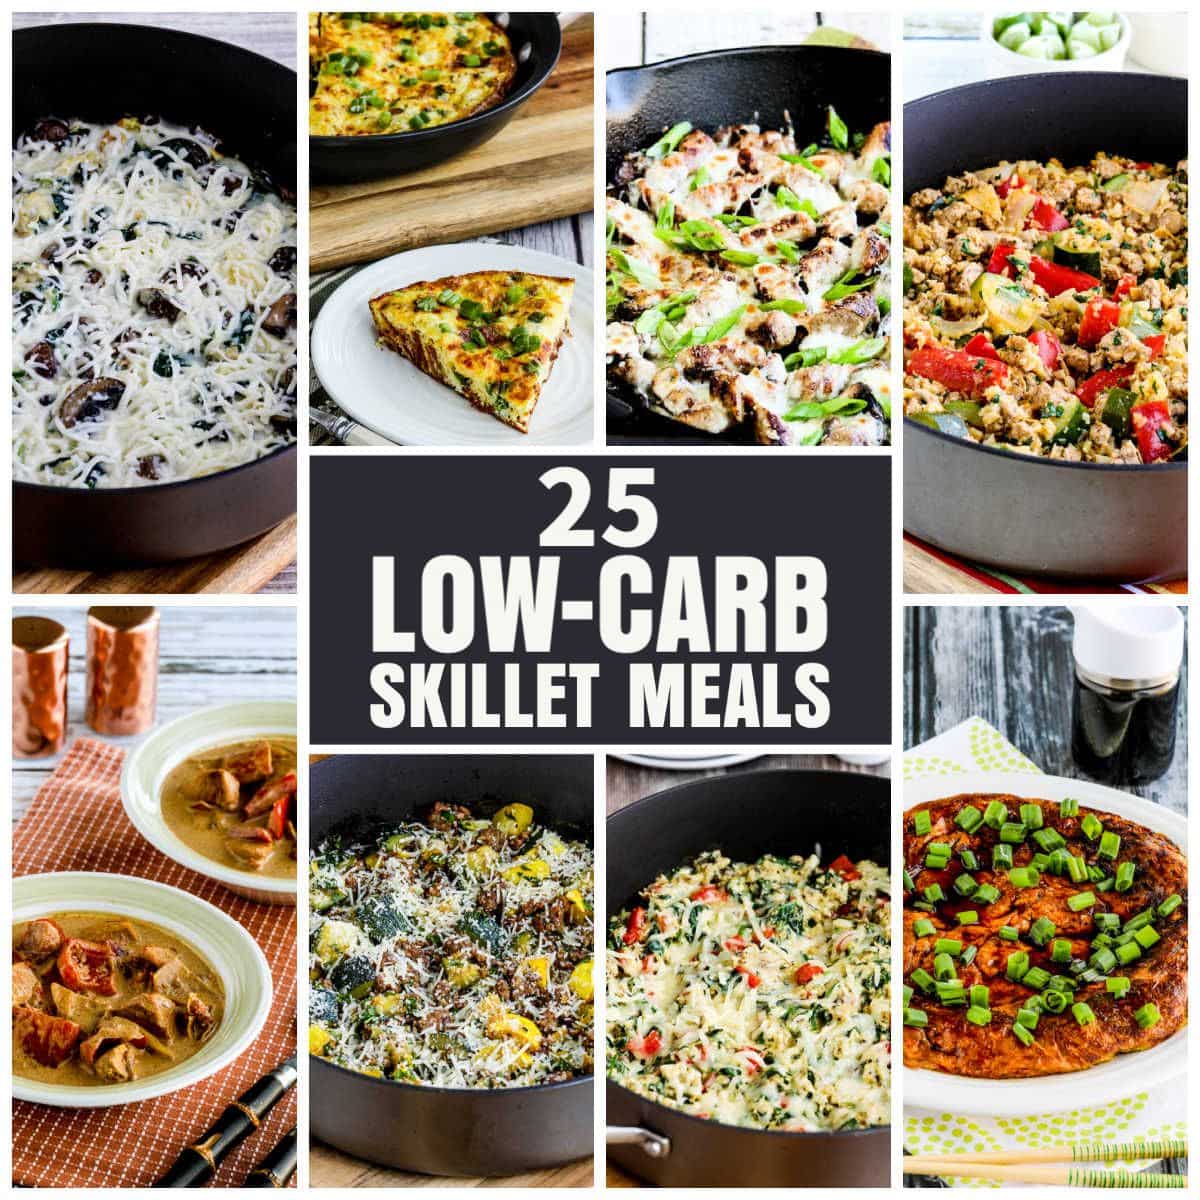 25 Low-Carb Skillet Meals collage with text overlay showing featured recipes